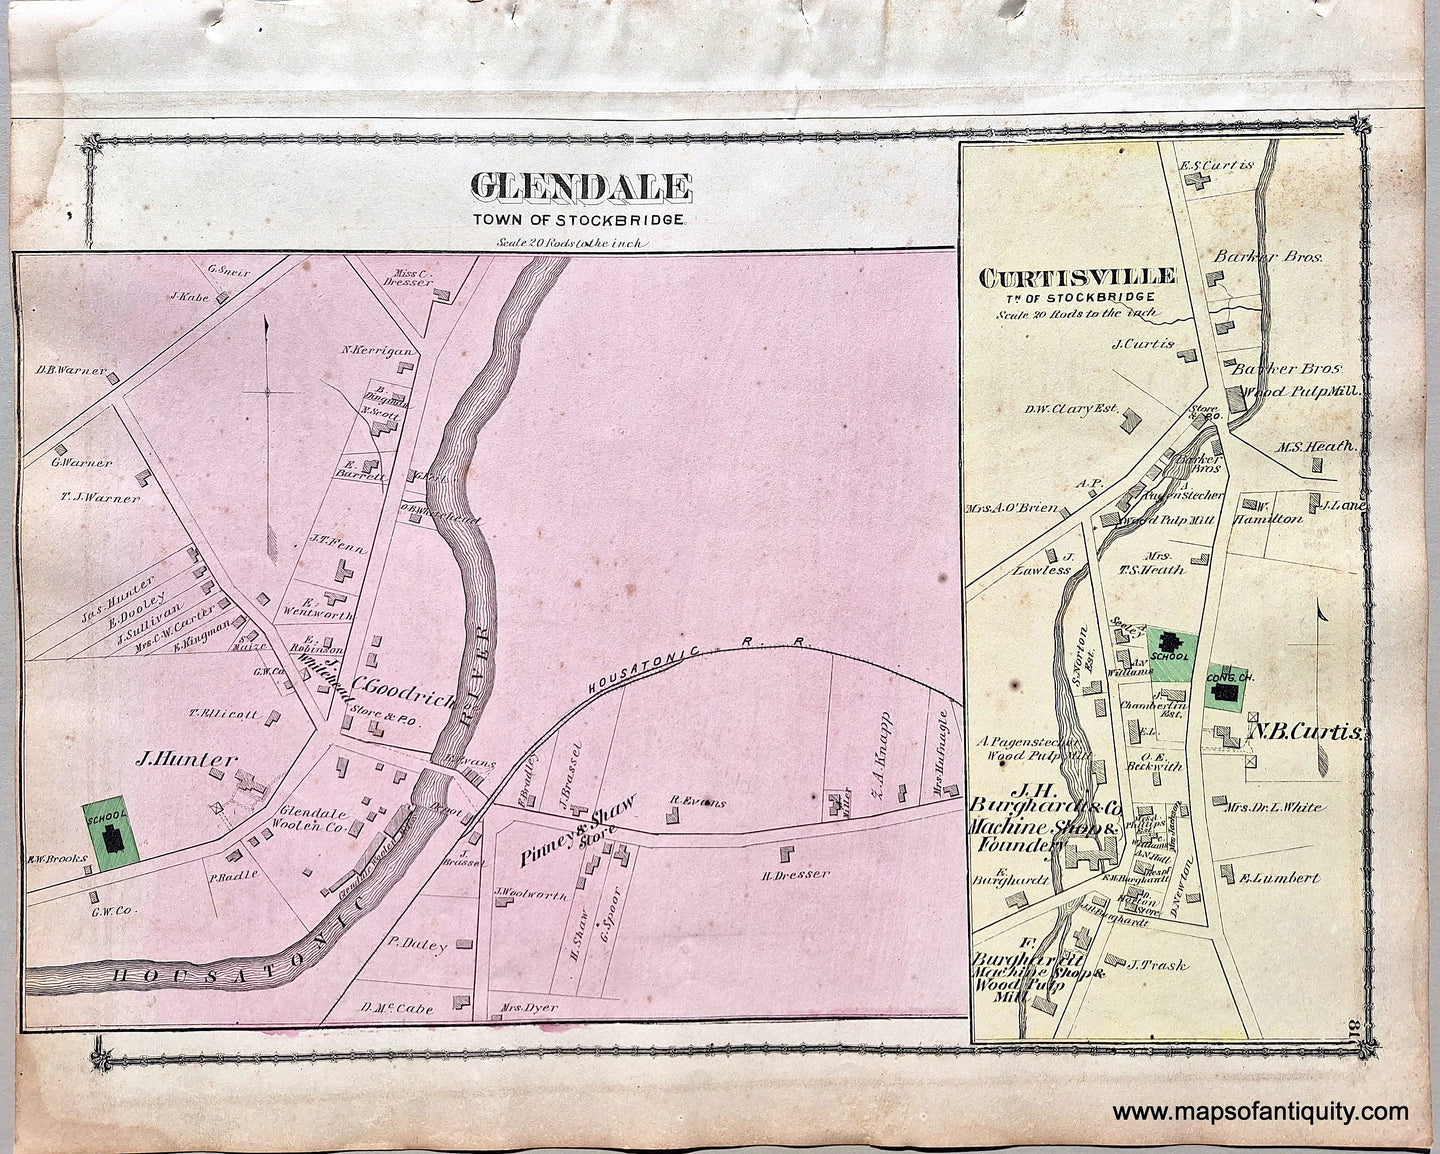 Antique map of parts of Stockbridge, Mass. Villages of Glendale and Curtisville. Hand-colored in pink and yellow with green for the schools and church. Shows property owners names. MAS1110V-Antique-Hand-Colored-Map-Glendale-Curtisville-Stockbridge-Massachusetts-Berkshire-County-p-81-MA-United-States-Northeast-1876-Beers-Maps-Of-Antiquity